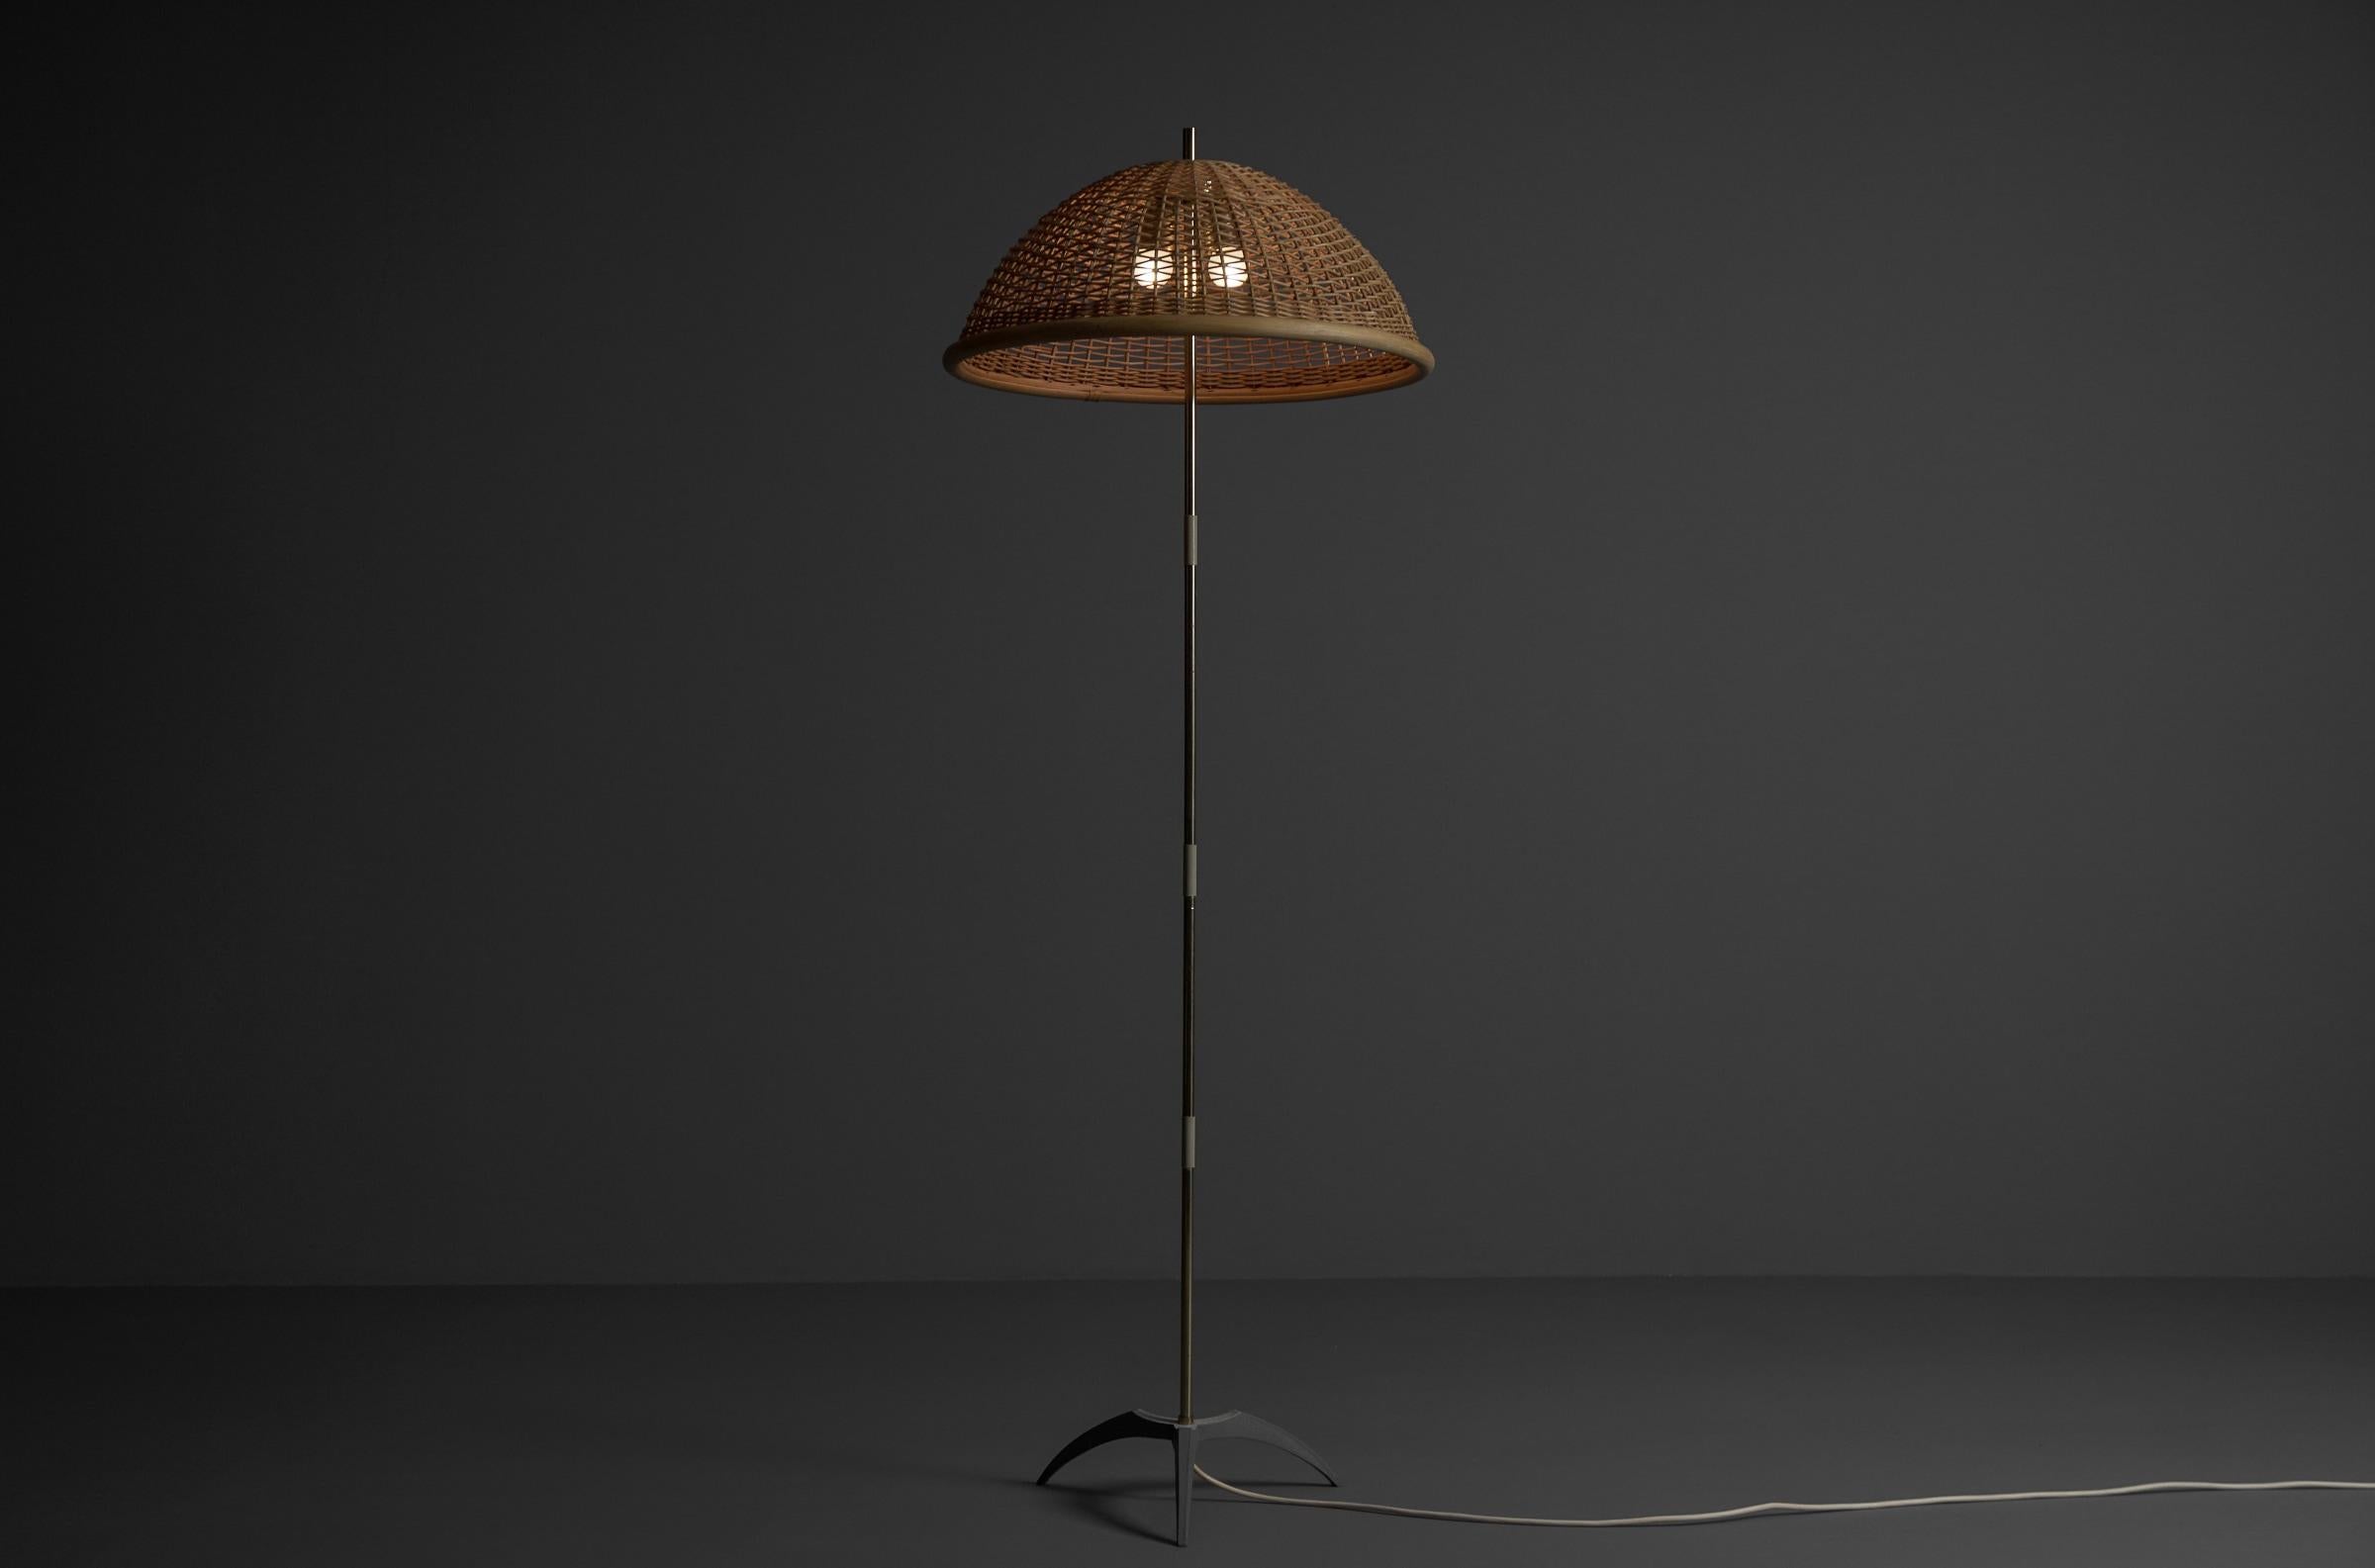 Mid-Century Modern Tripod Floor Lamp with Rattan Shade, 1950s Italy For Sale